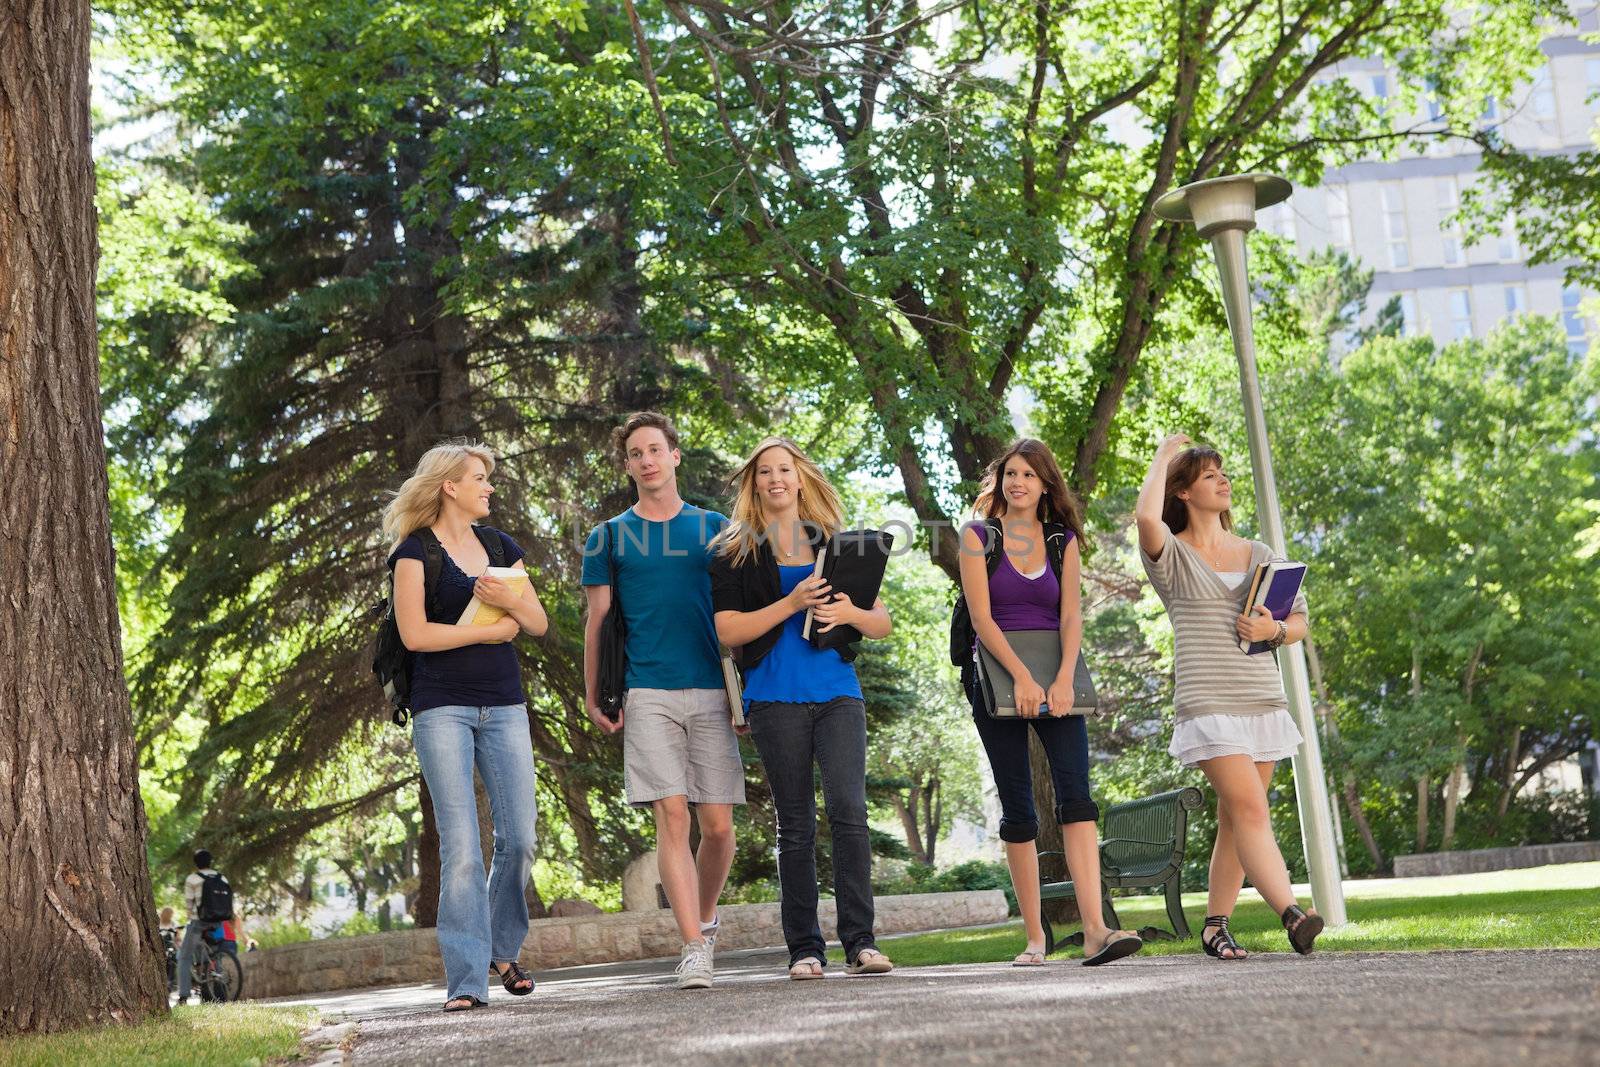 University Students on Campus by leaf